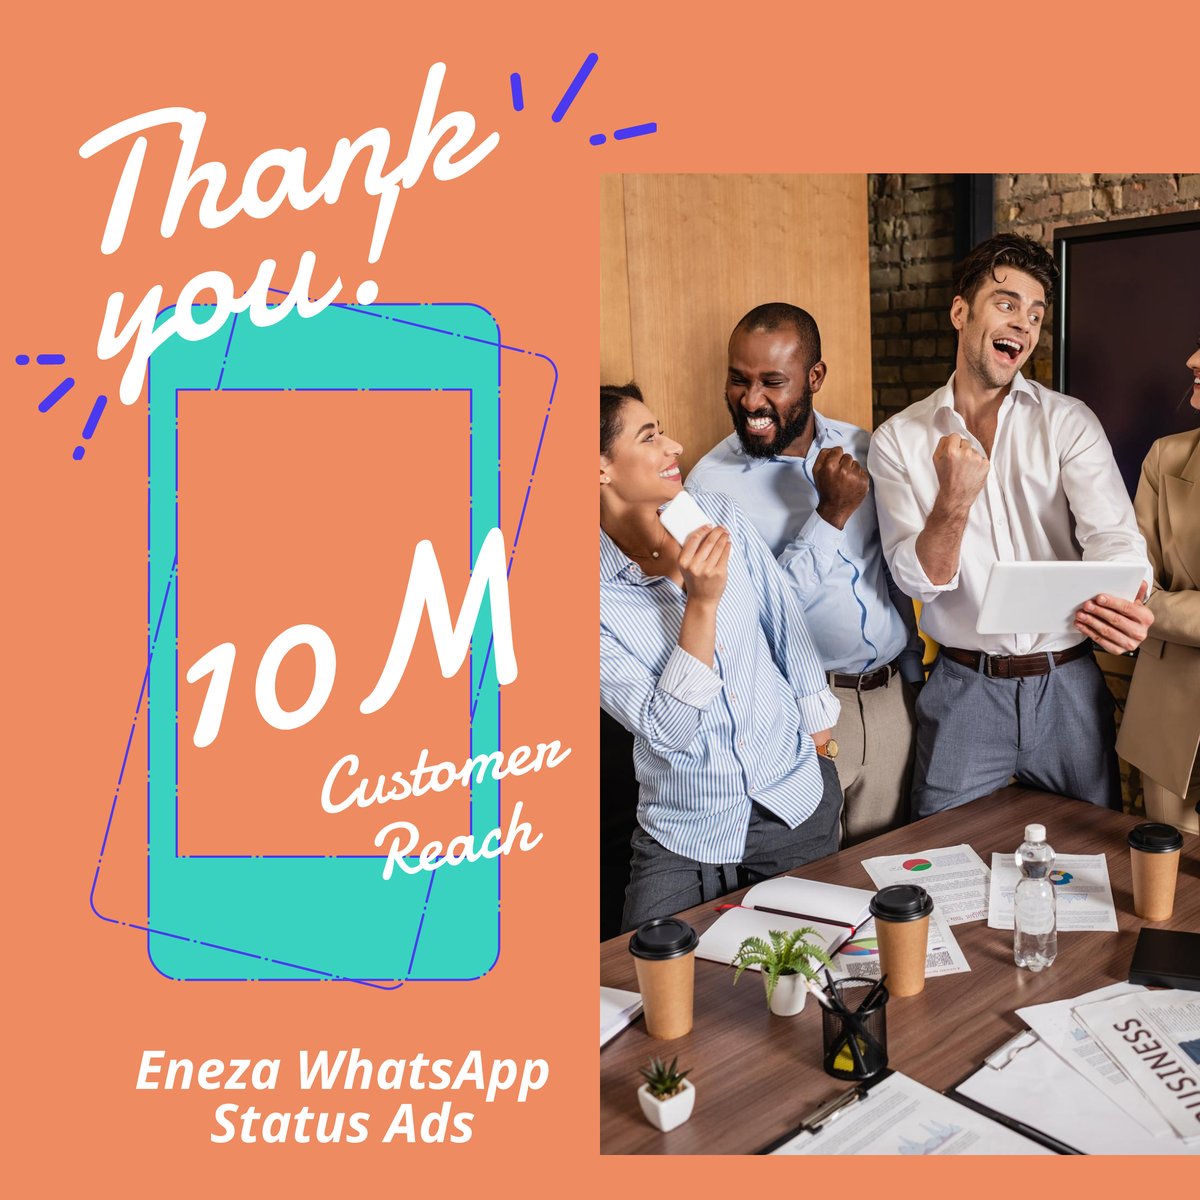 Did you know you could reduce your ad spend and still reach millions of customers? Try Eneza WhatsApp status ads. Visit our website at eneza.app and get started today. #WhatsAppAds #BrandVisibility #EnezaAds #DigitalAds